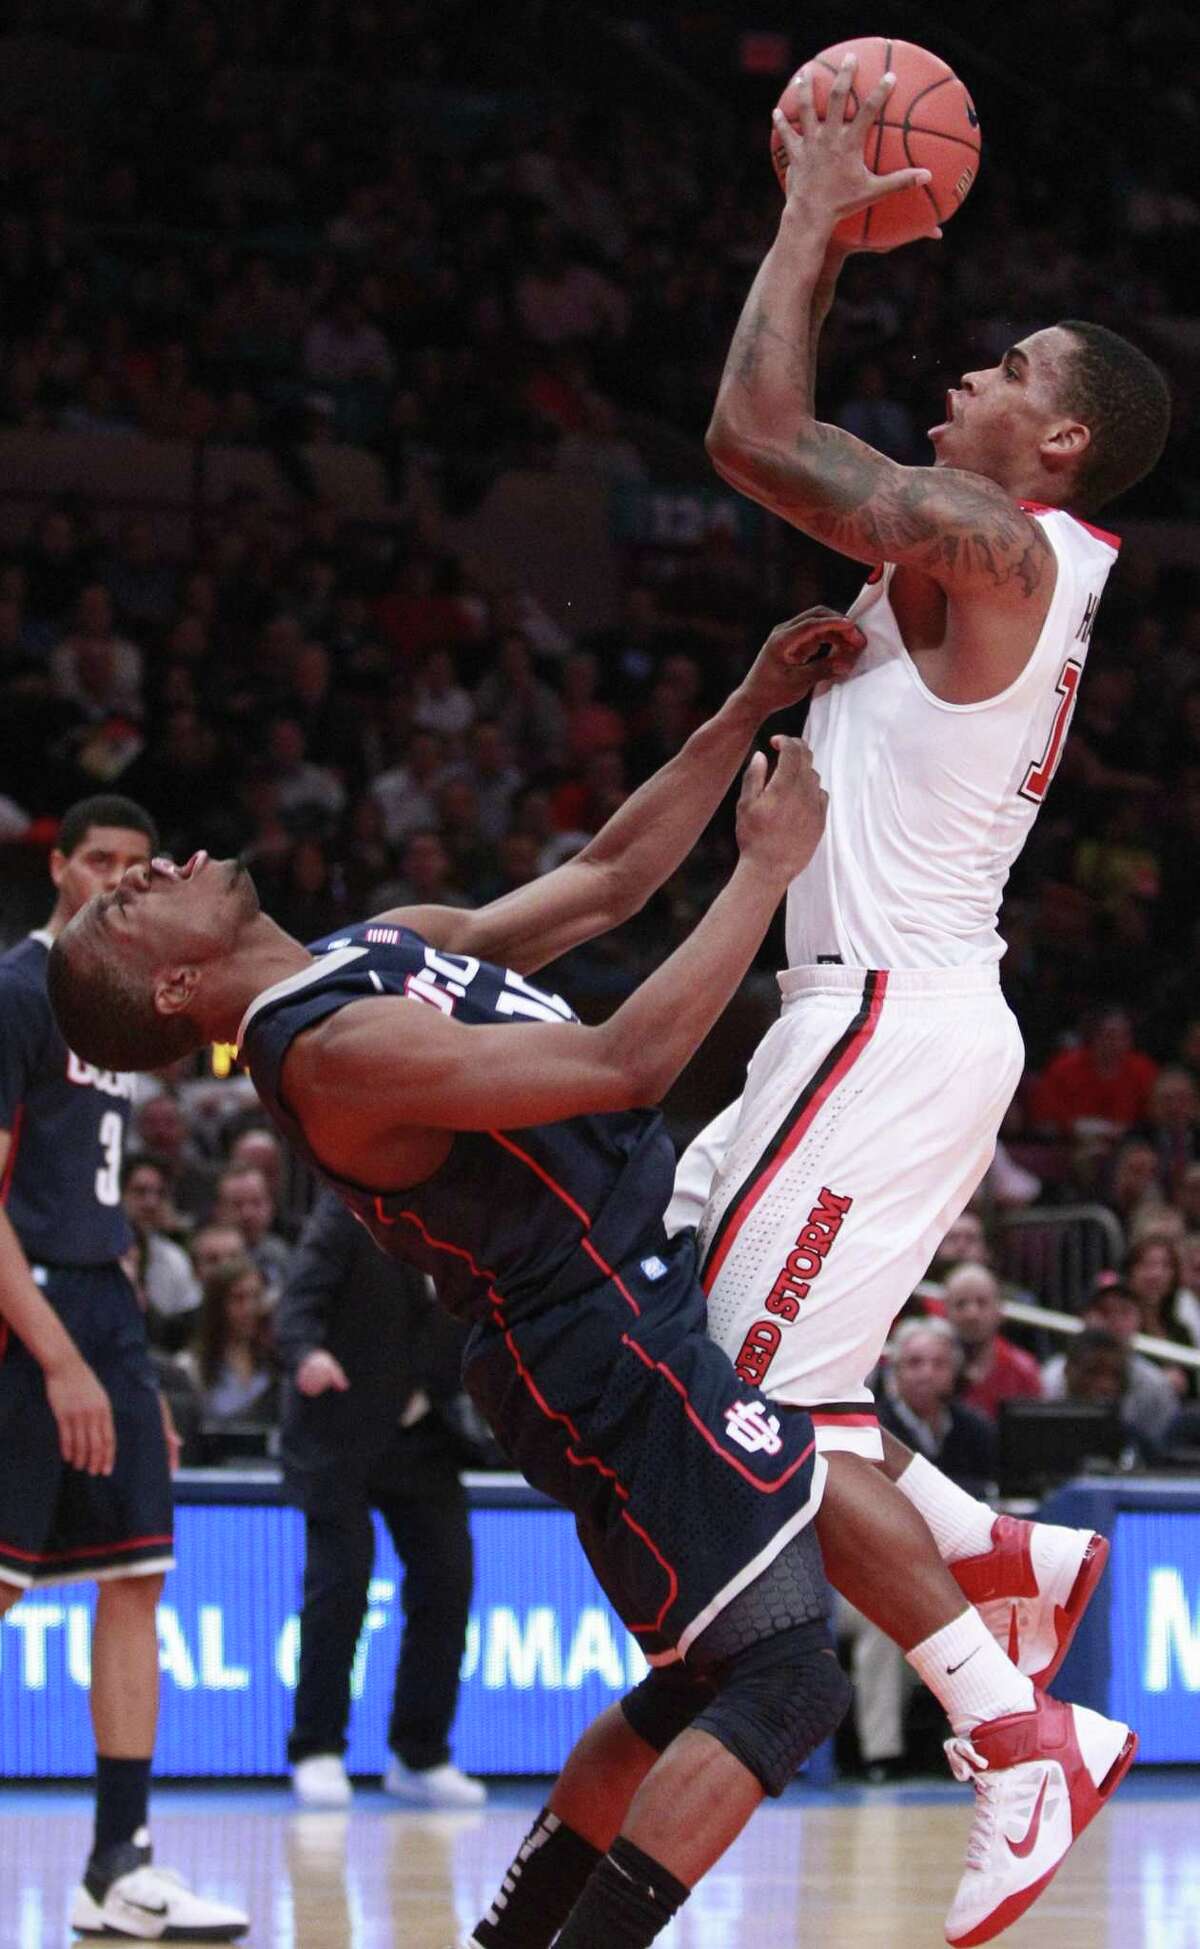 AP St. John's Dwight Hardy, right, scores as he is fouled by Connecticut's Kemba Walker in the second half of an NCAA college basketball game Thursday in New York. Hardy scored 33 points as St. John's won the game 89-72.